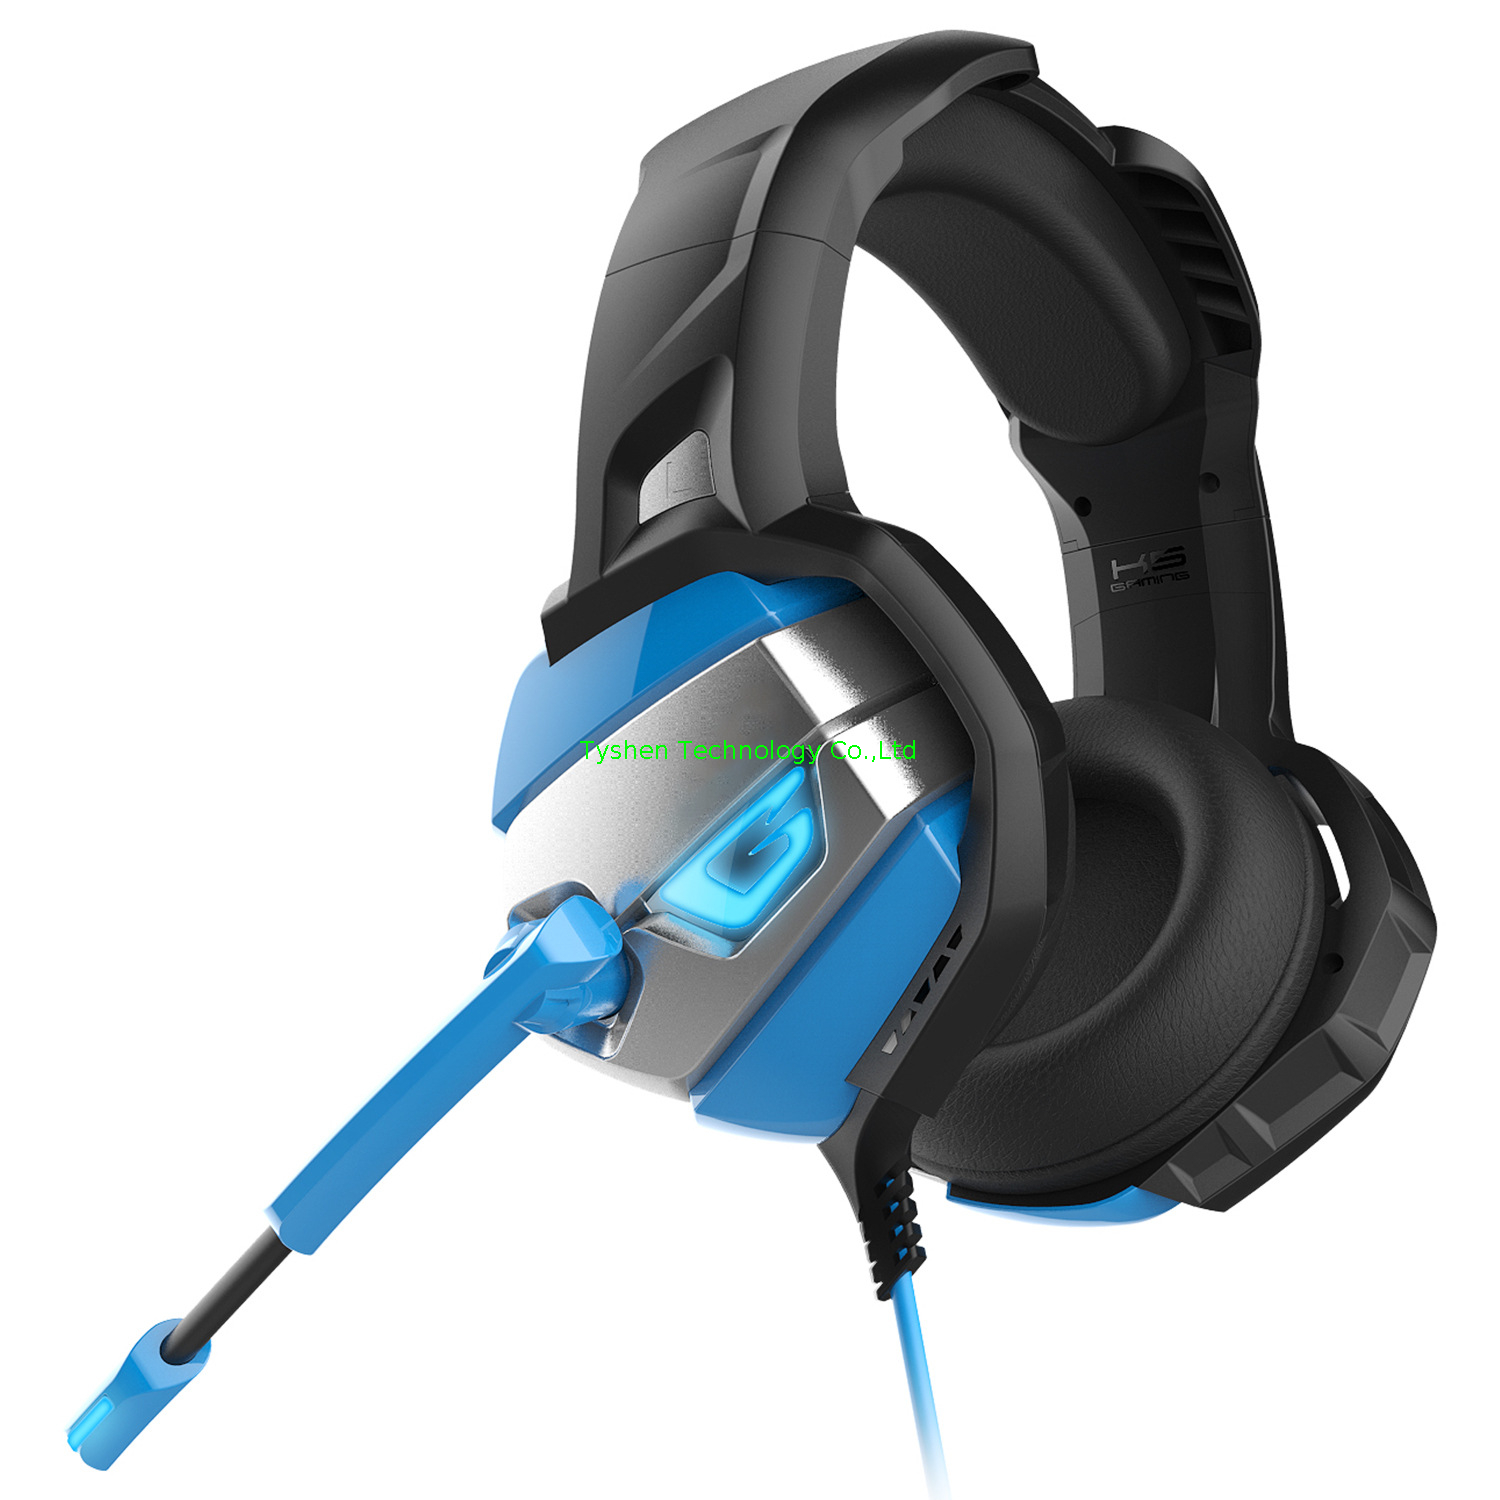 2021 New Model computer headset with USB and 3.5 Audio port ,RGB lighting 